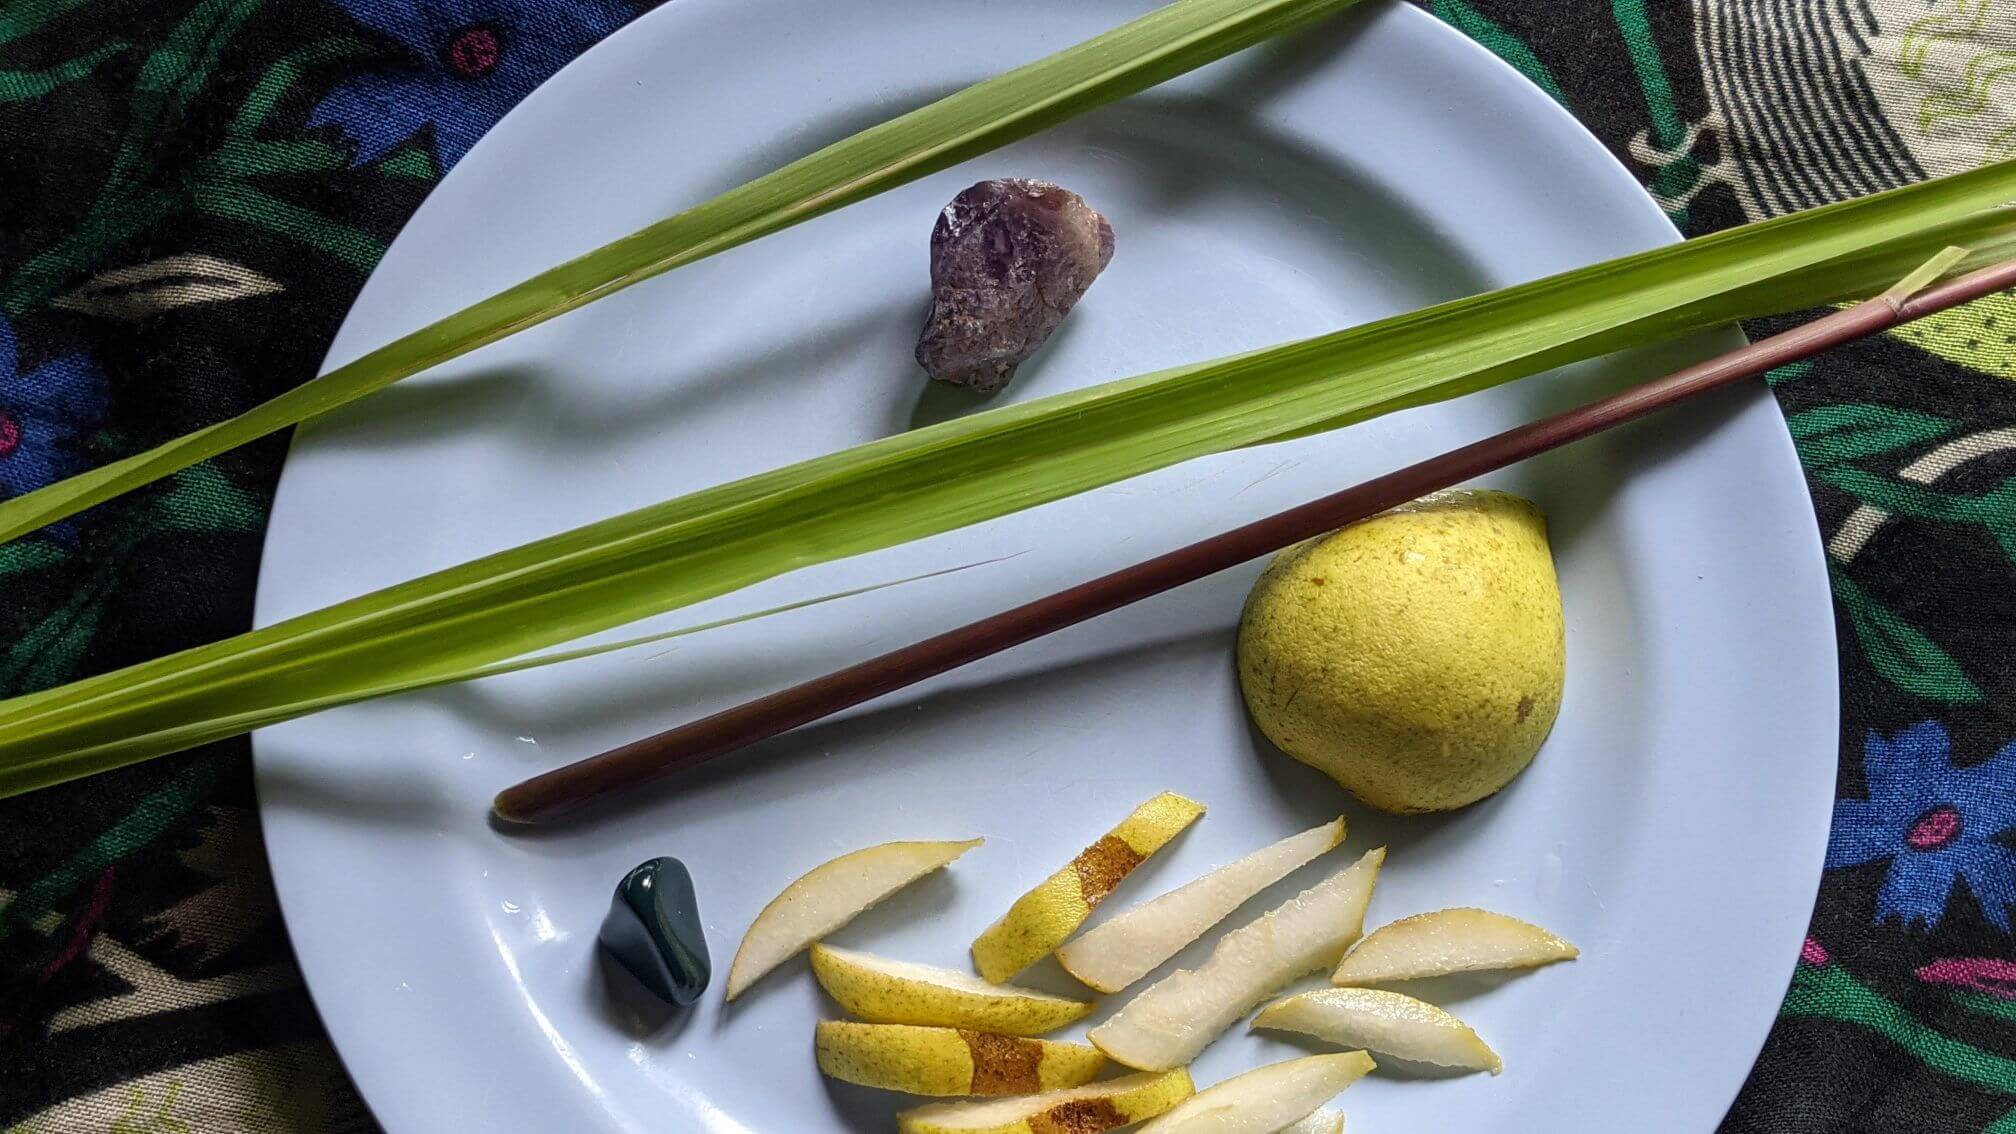 Fresh lemongrass sits on a plate with slices of fresh, juicy pear in natural light